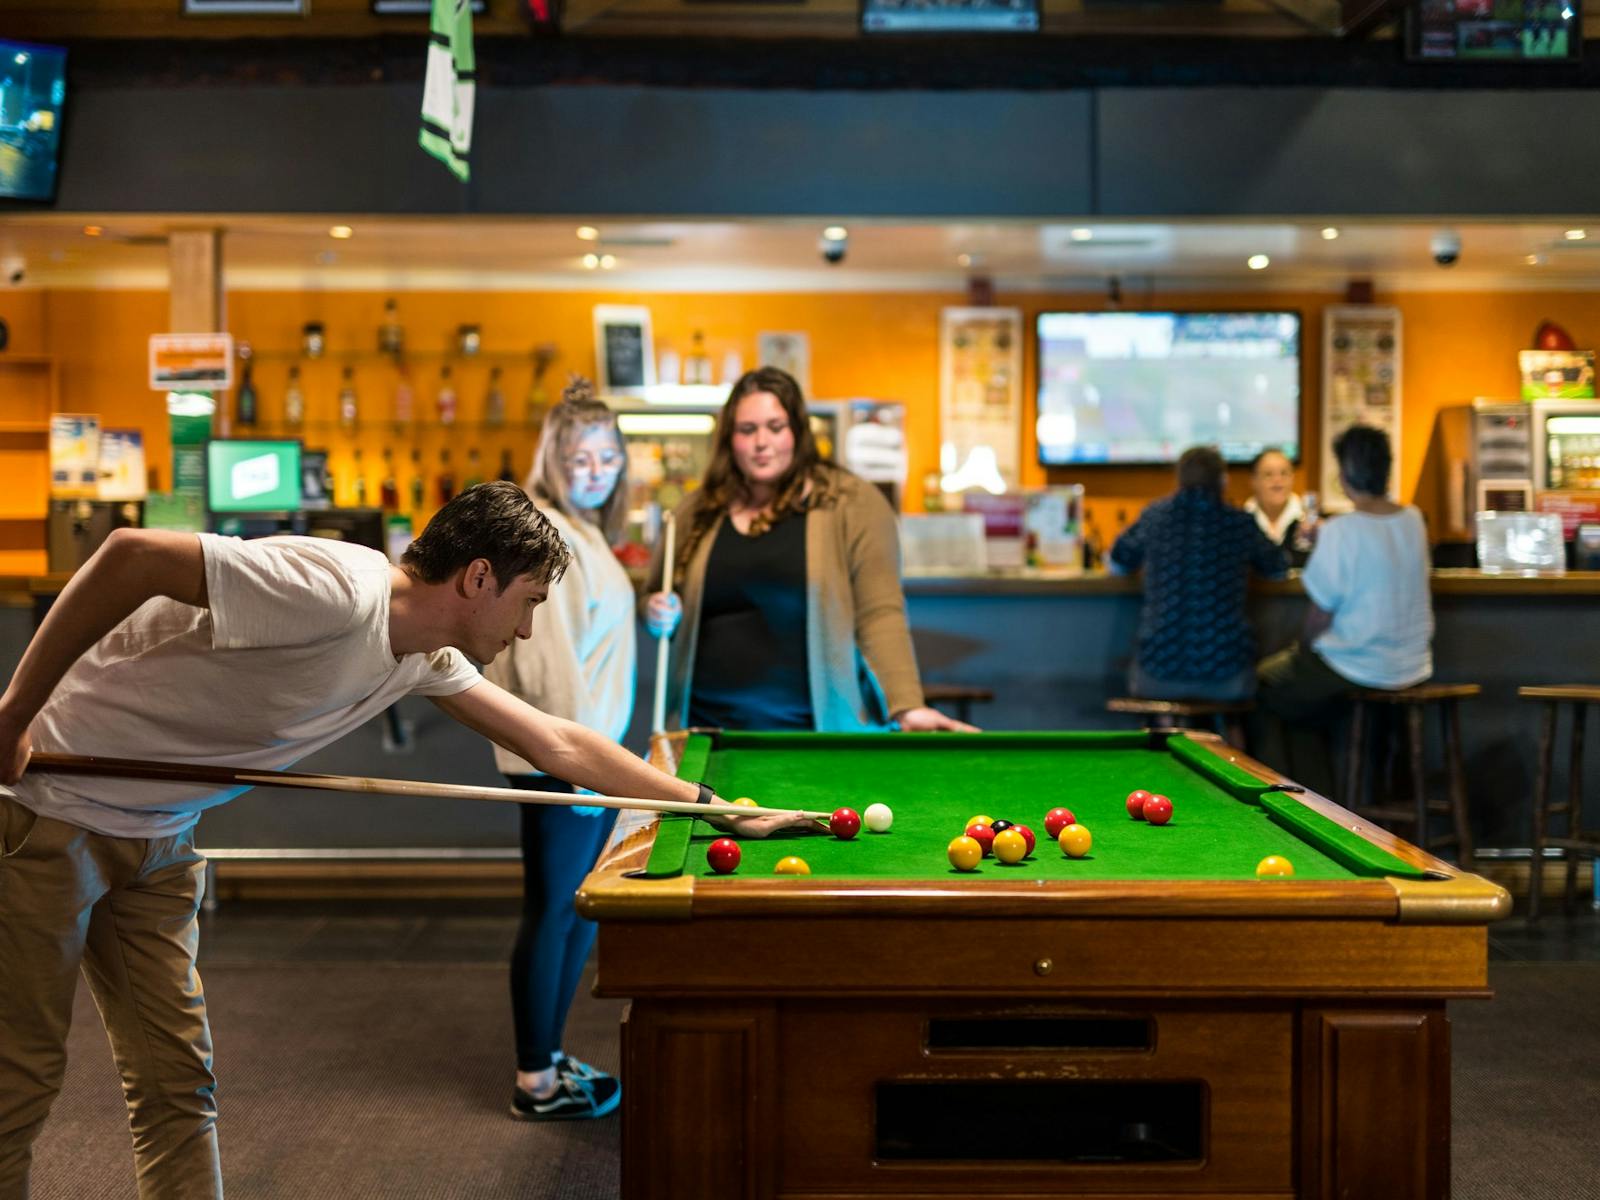 Young man lining up a shot at a pool table in Millers Sports Bar with others watching on